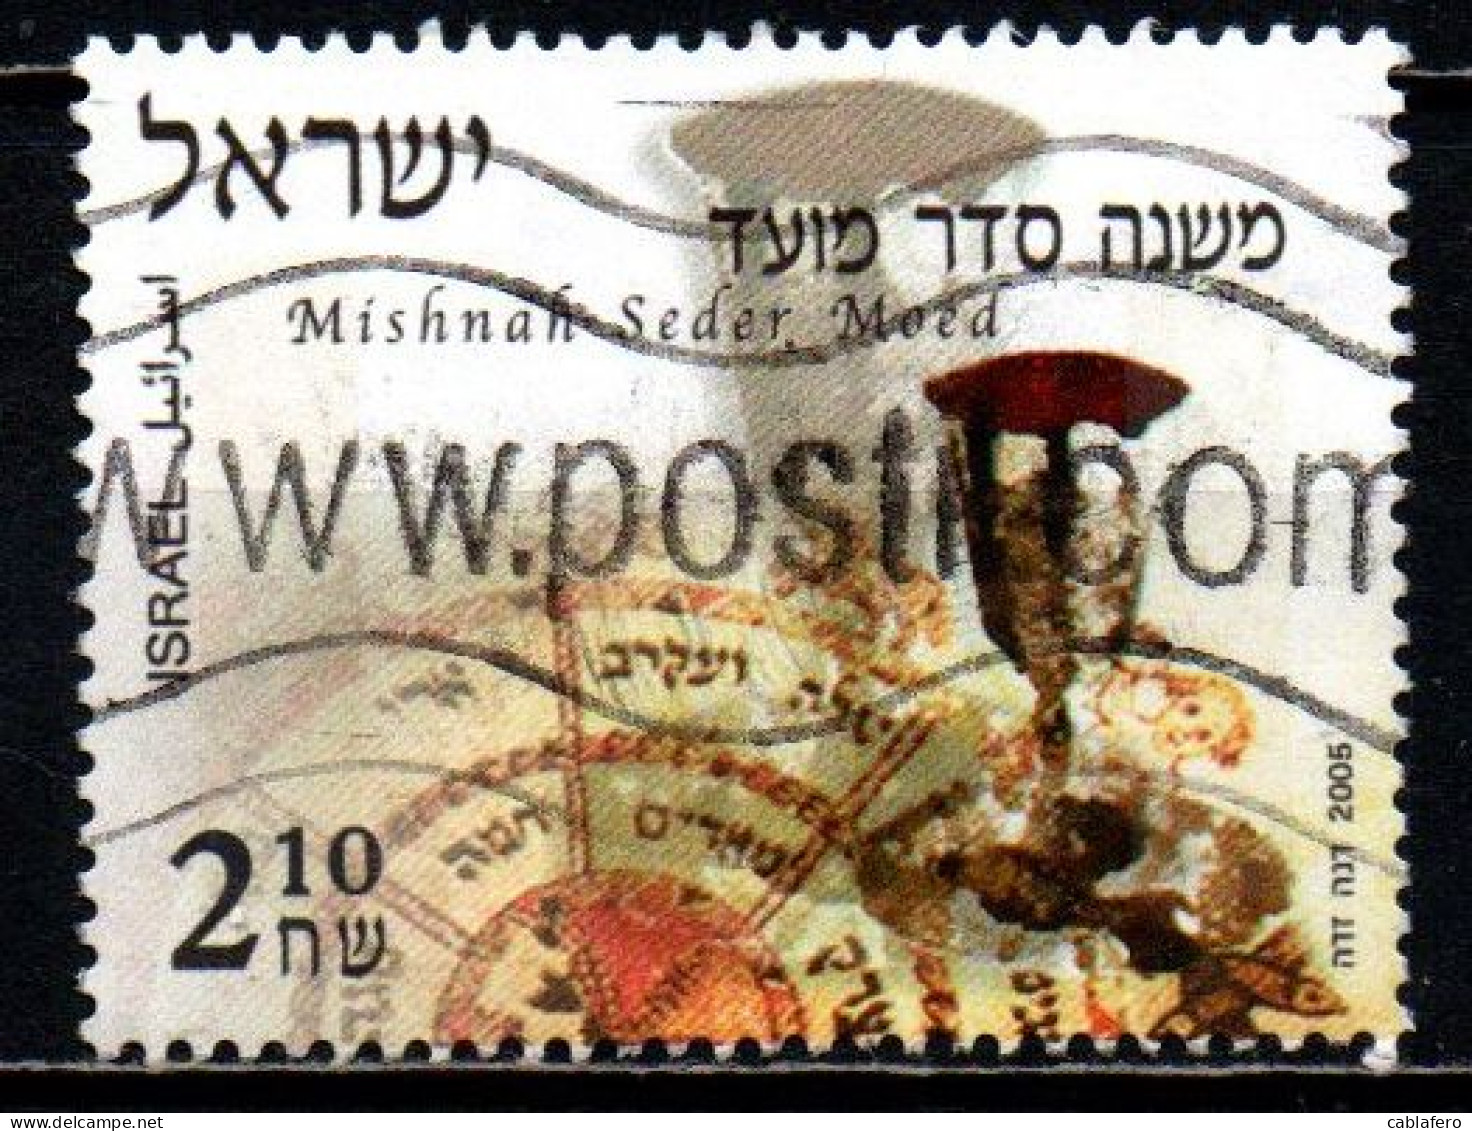 ISRAELE - 2005 - Orders Of The Mishnah - Moed - USATO - Used Stamps (without Tabs)